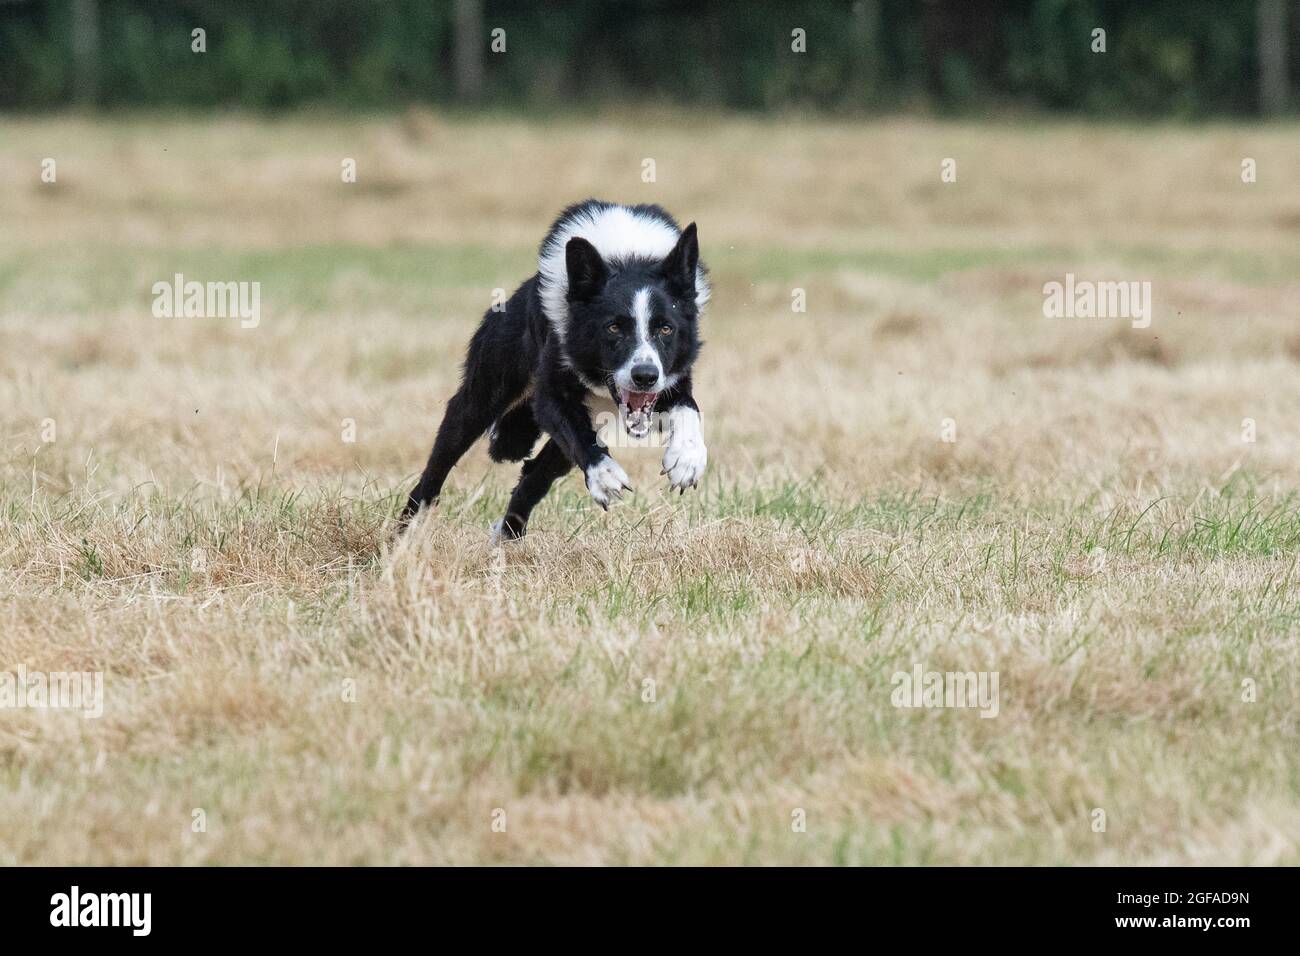 action shot of a border collie dog Stock Photo